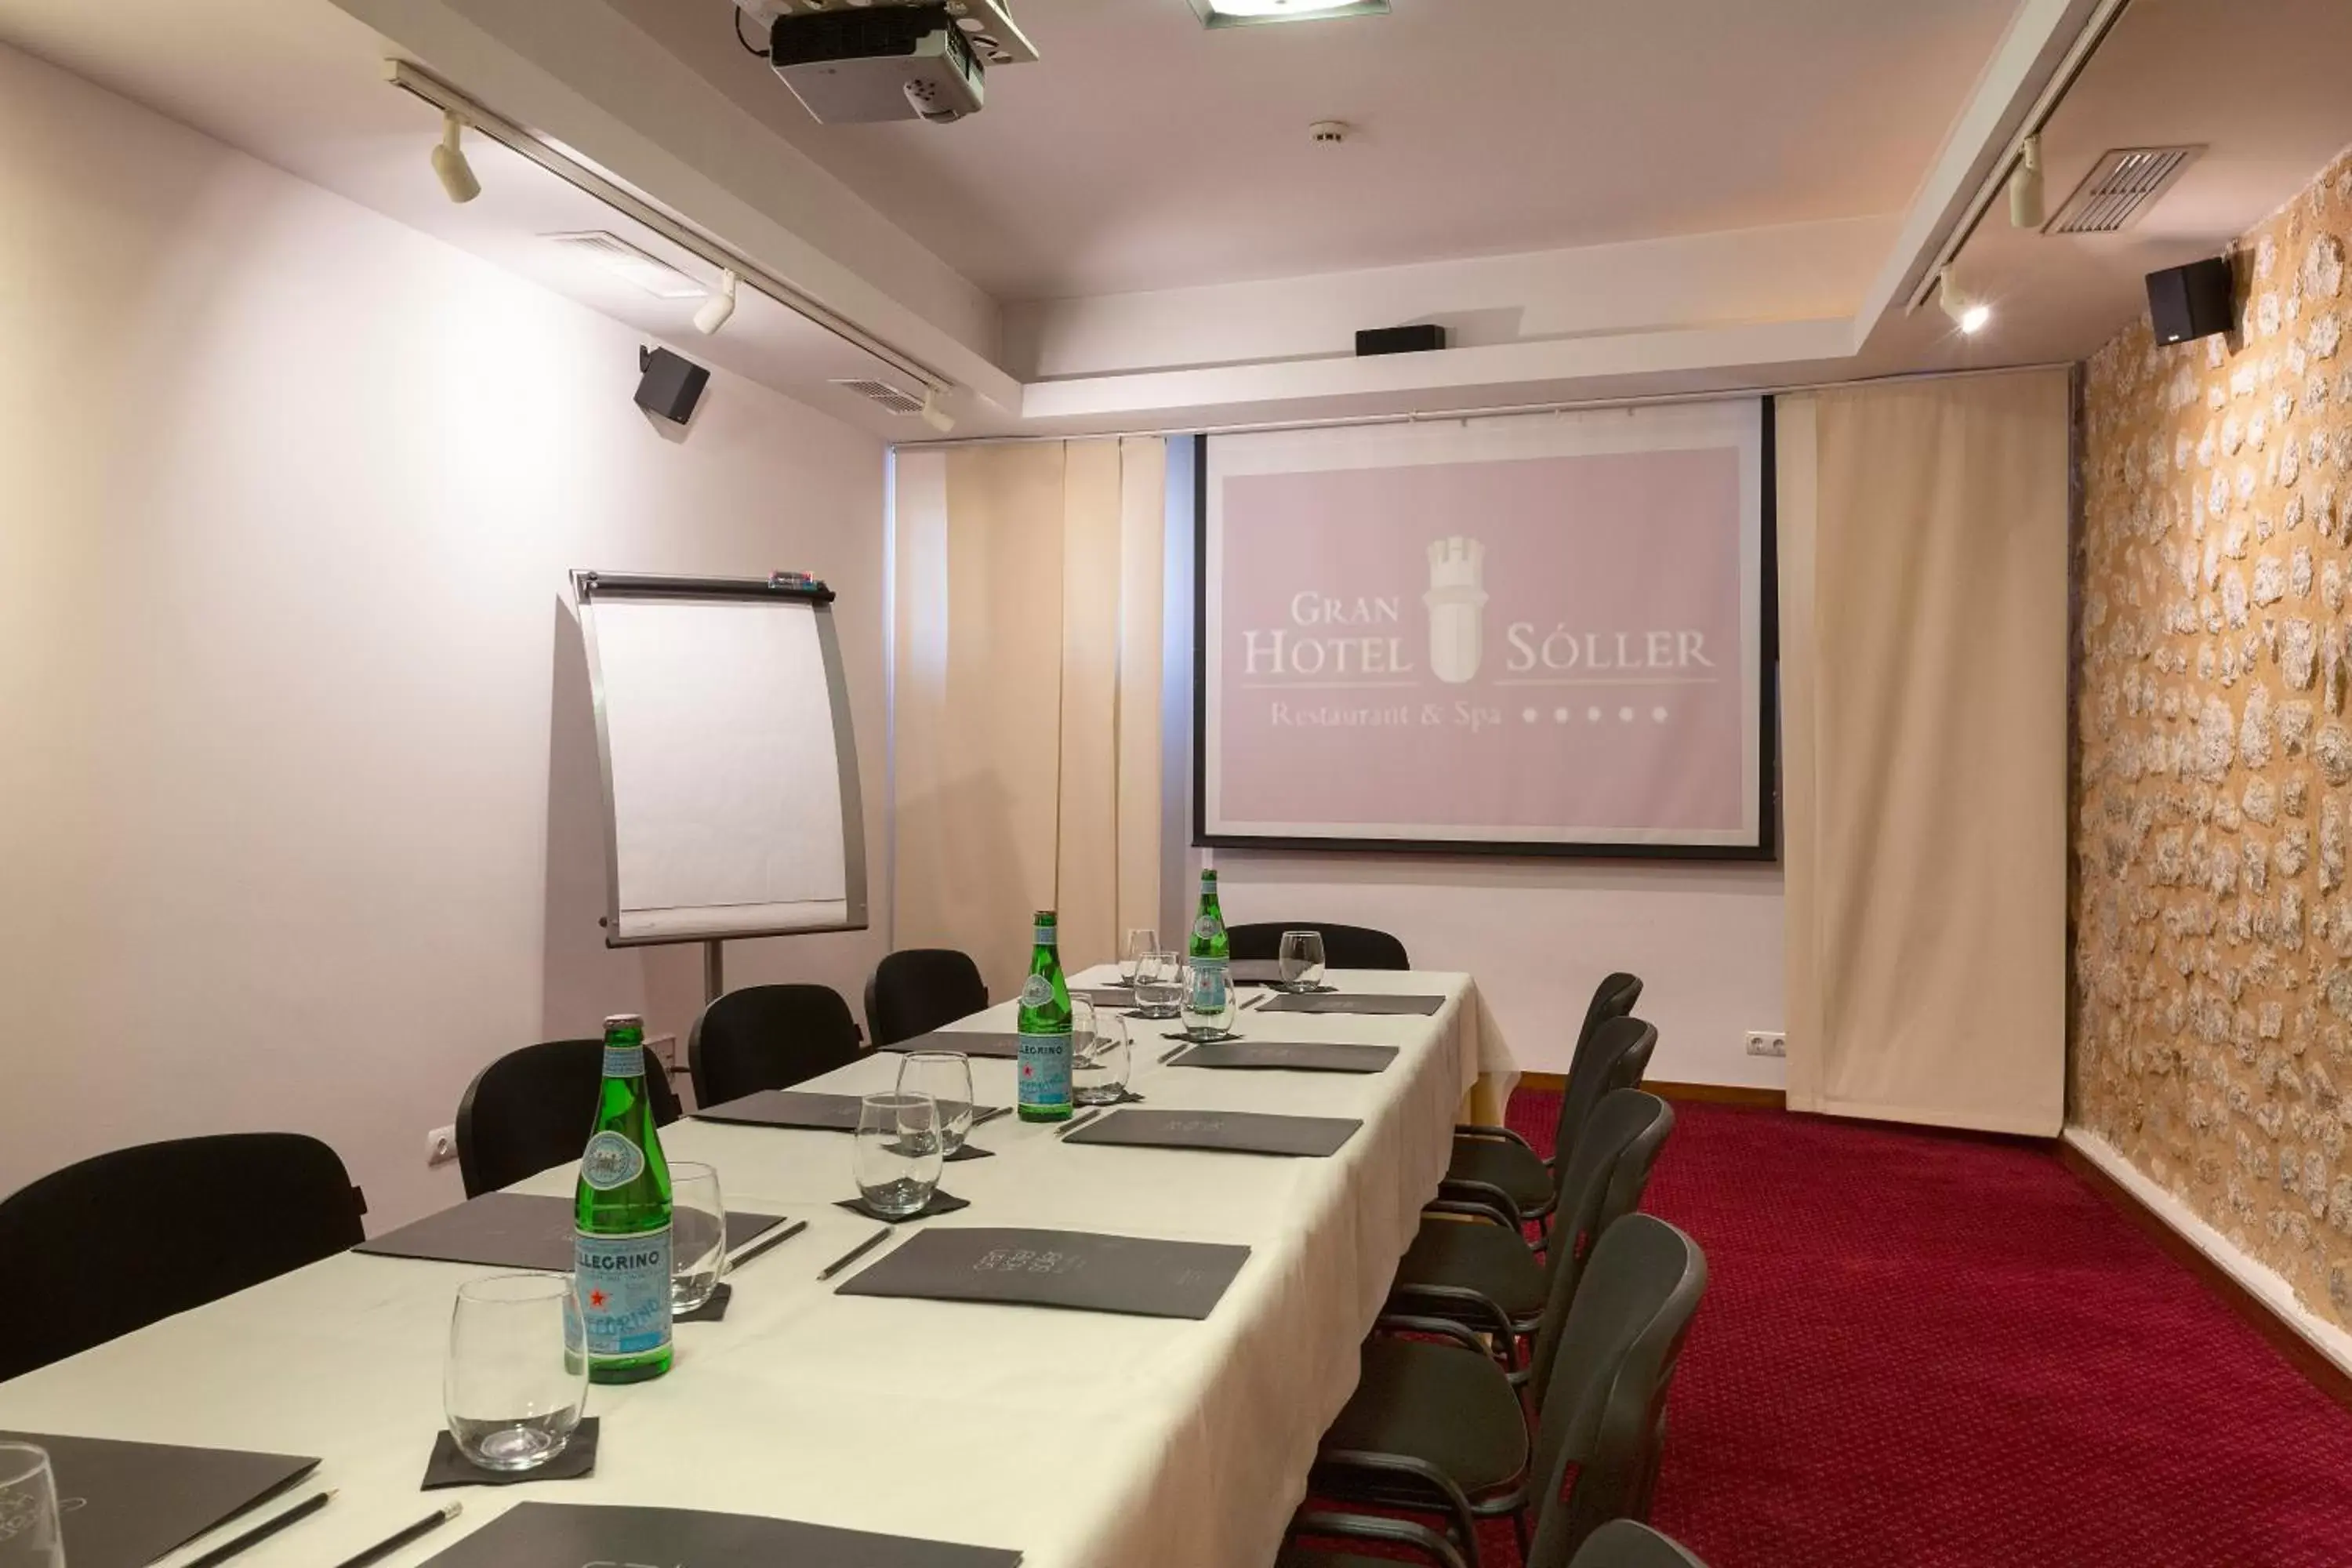 Meeting/conference room, Business Area/Conference Room in Gran Hotel Soller